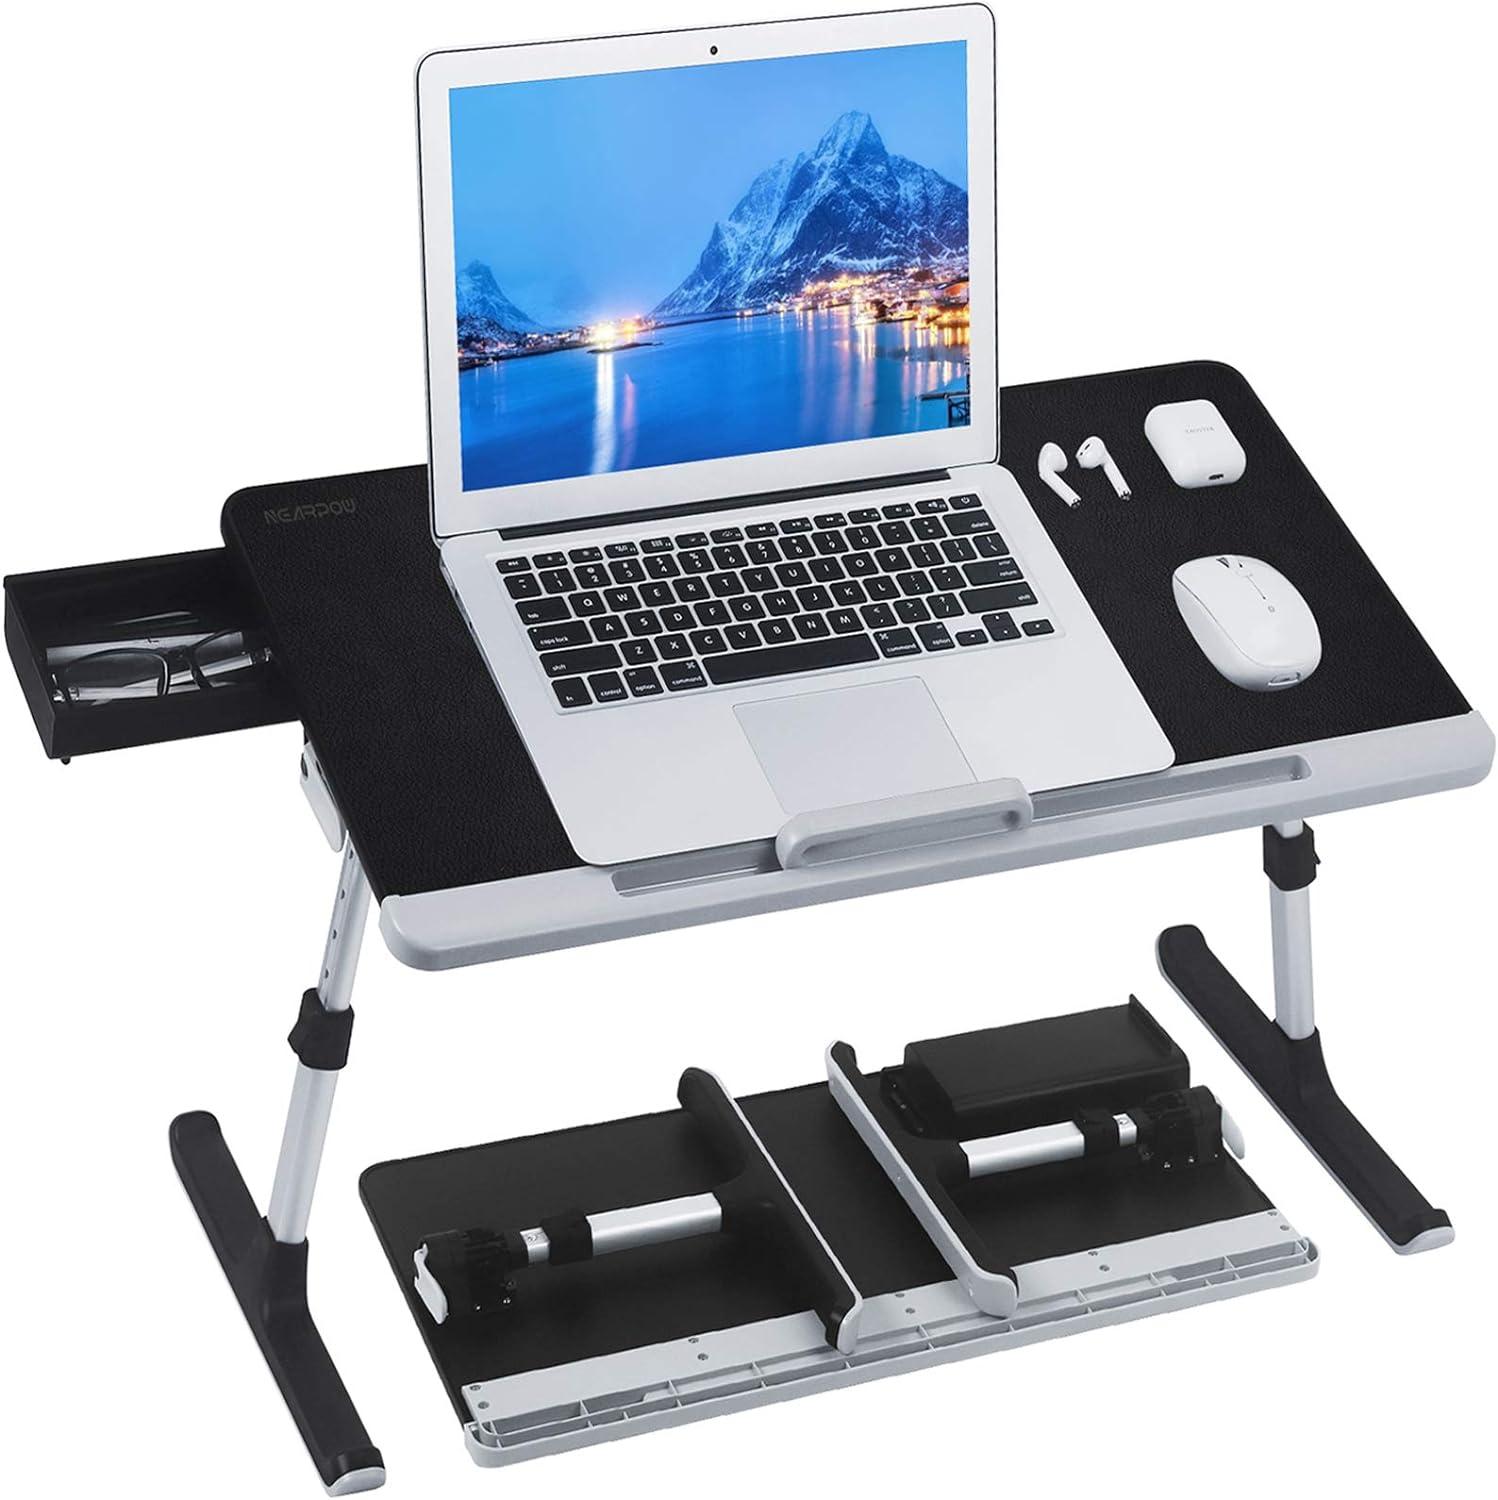 nearpow laptop desk for bed for laptop and writing adjustable computer tray  nearpow ?b08fqv5zv4